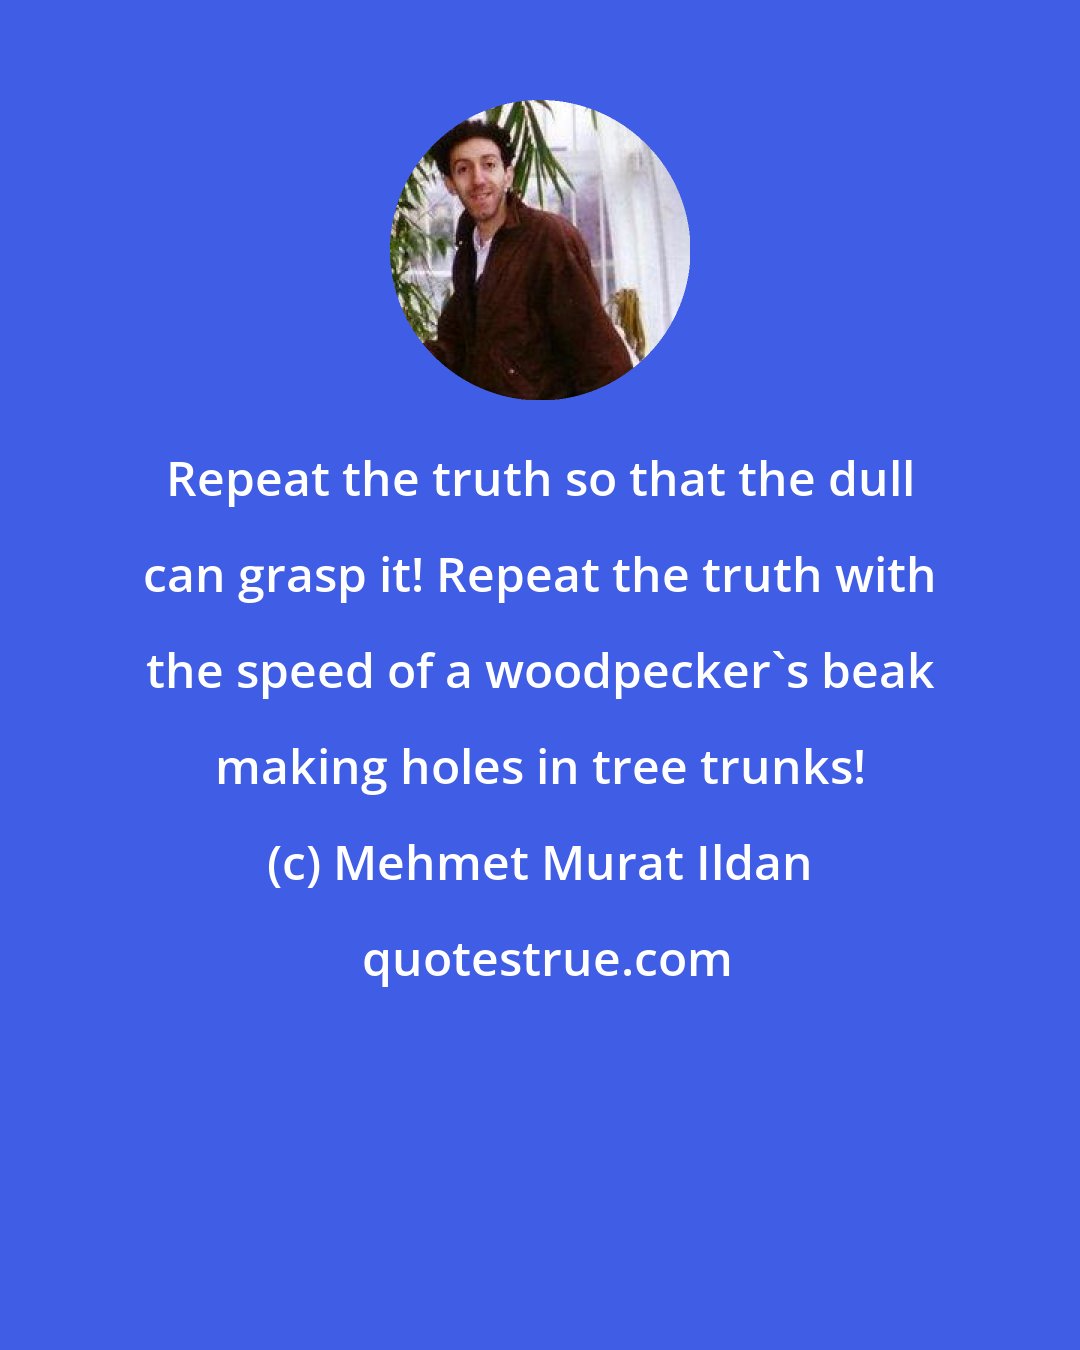 Mehmet Murat Ildan: Repeat the truth so that the dull can grasp it! Repeat the truth with the speed of a woodpecker's beak making holes in tree trunks!